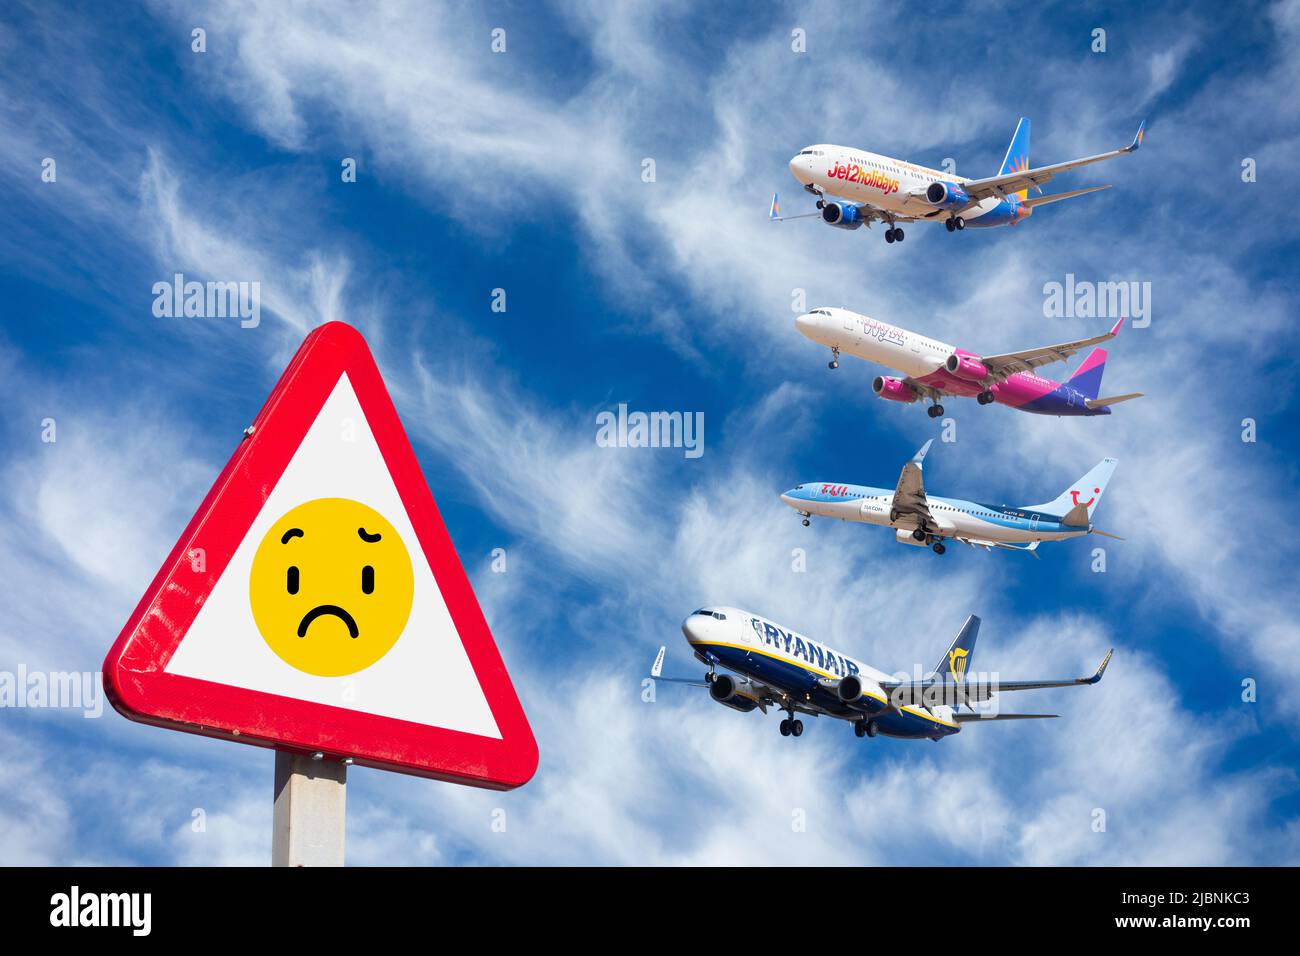 Cancelled, delayed flights concept. Tui, Ryanair, Jet2.com and Wizzair airplanes and sad emoji face on sign. Stock Photo